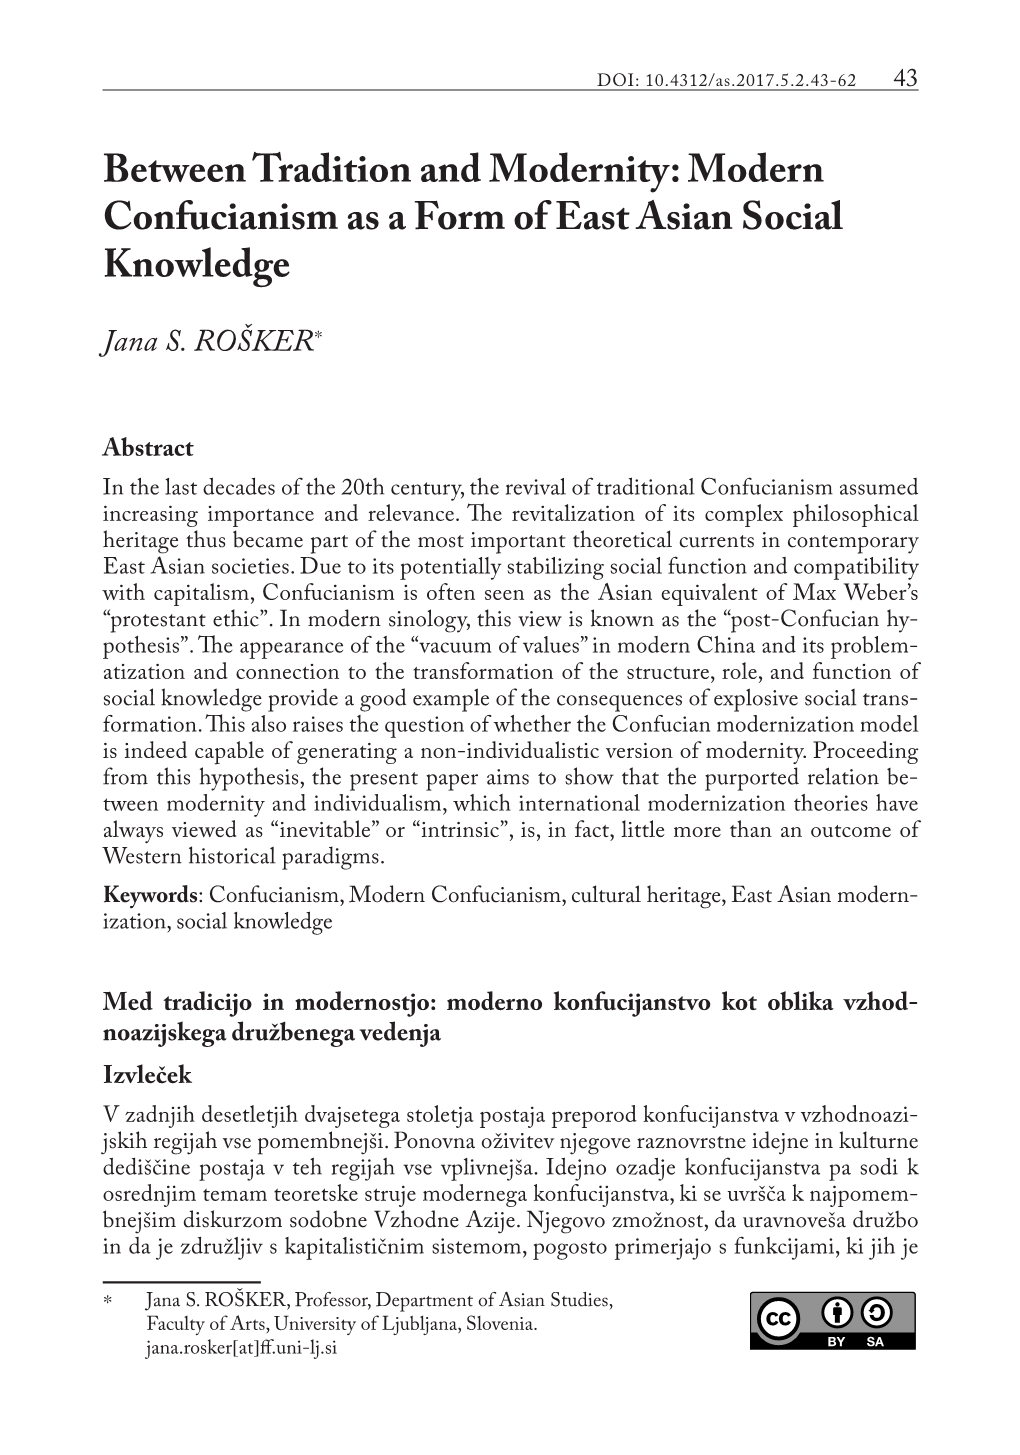 Modern Confucianism As a Form of East Asian Social Knowledge